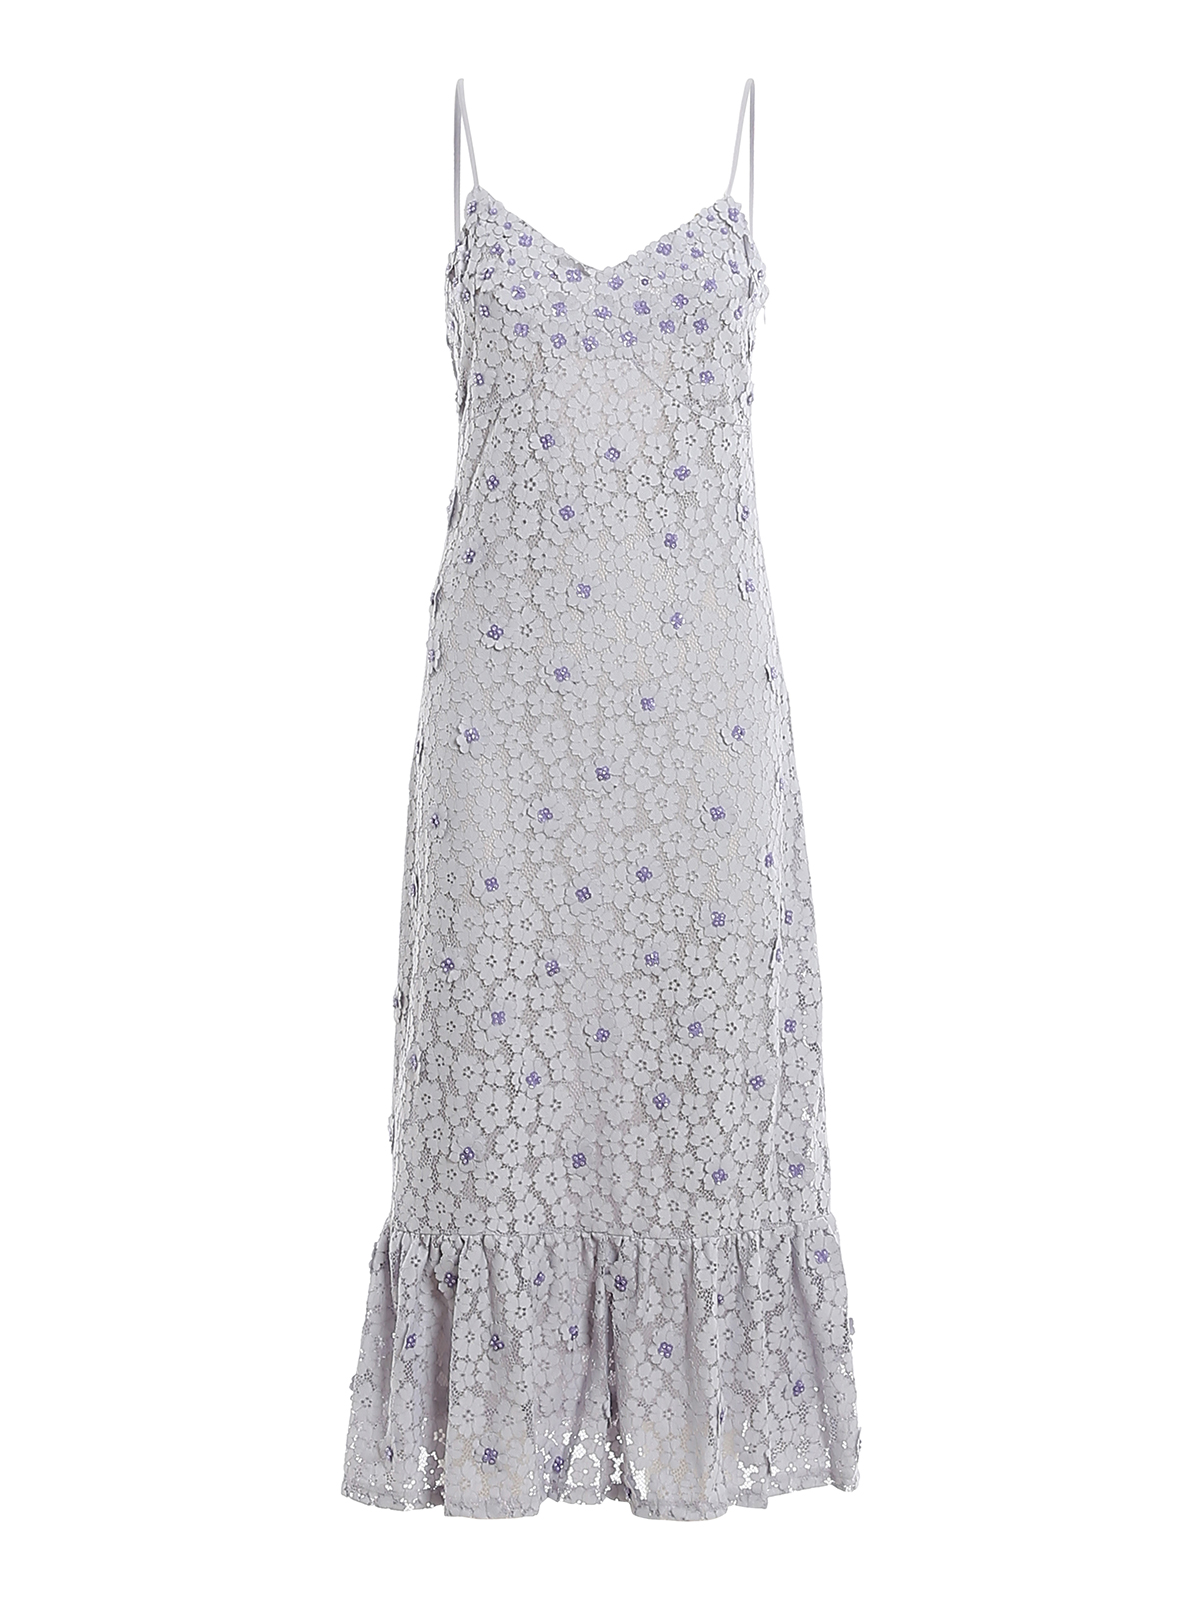 corded lace dress